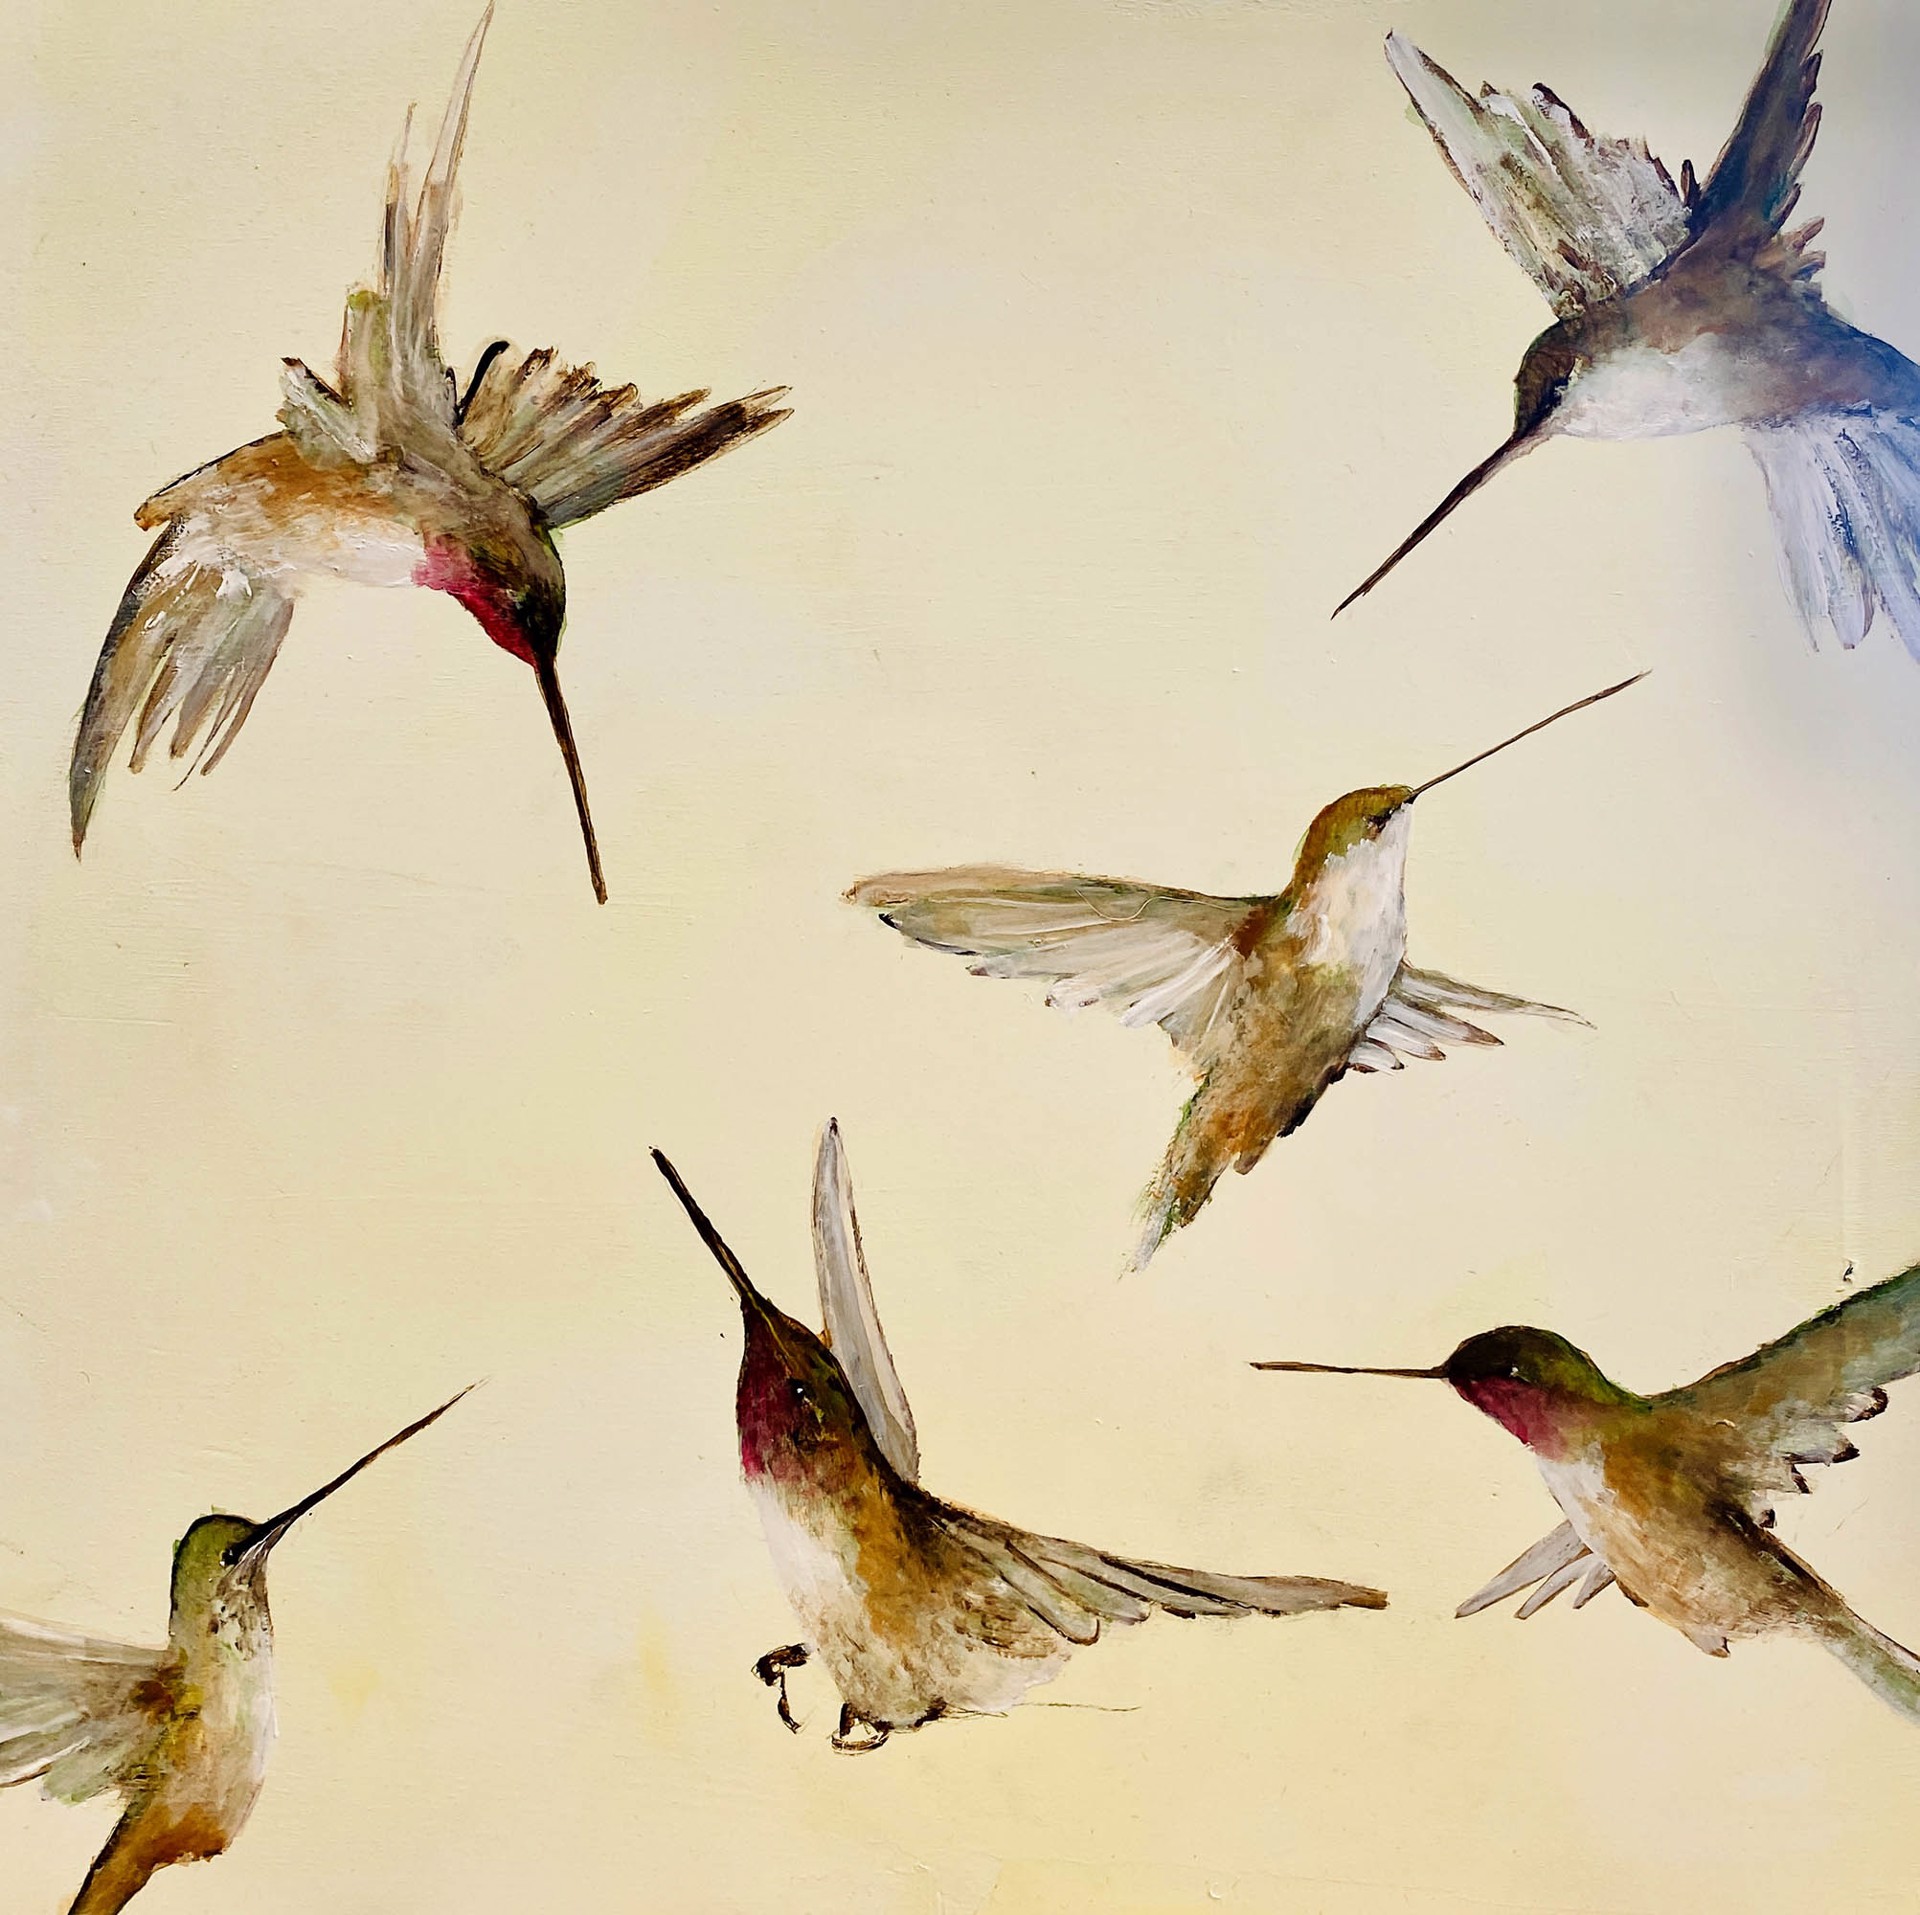 Original Oil Painting Featuring A Flurry Of Hummingbirds Over Yellow Background